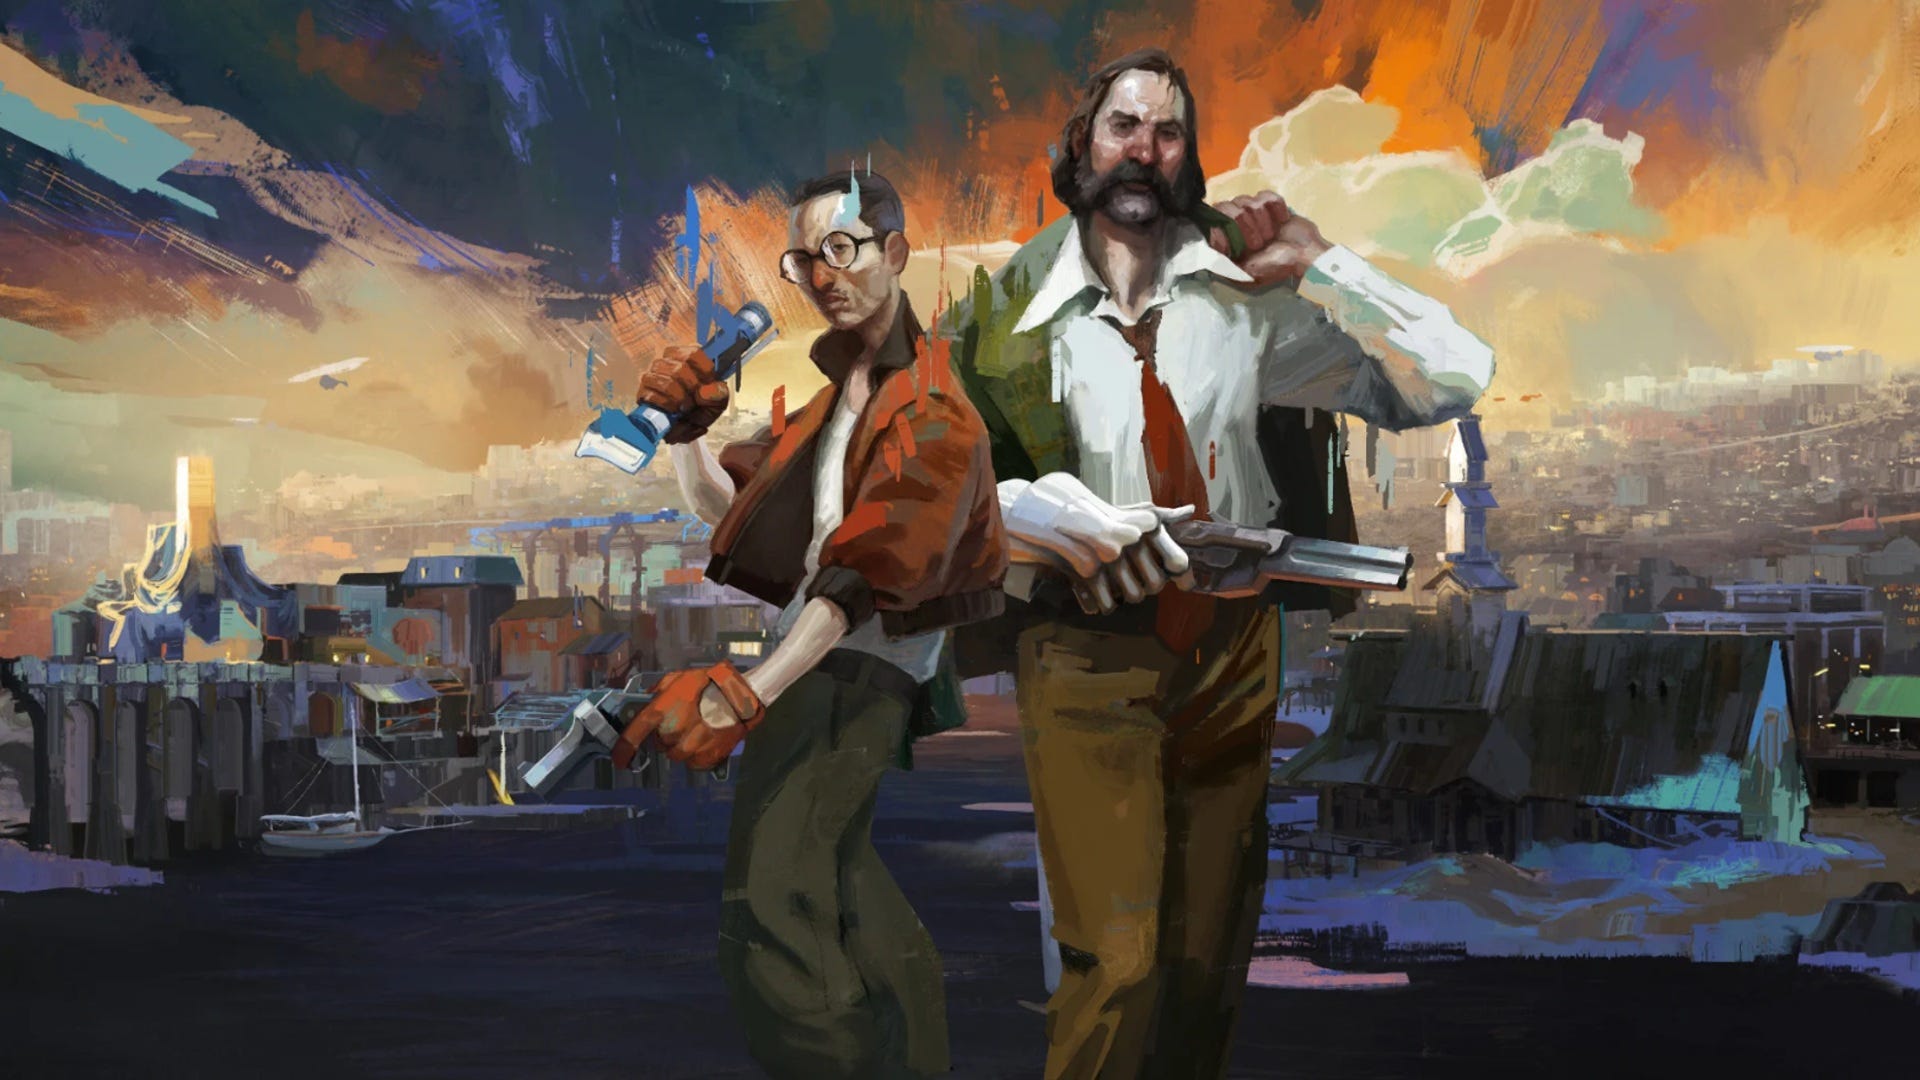 Reports Indicate Cancellation of Disco Elysium Expansion, Potential Redundancy for a Quarter of the Staff